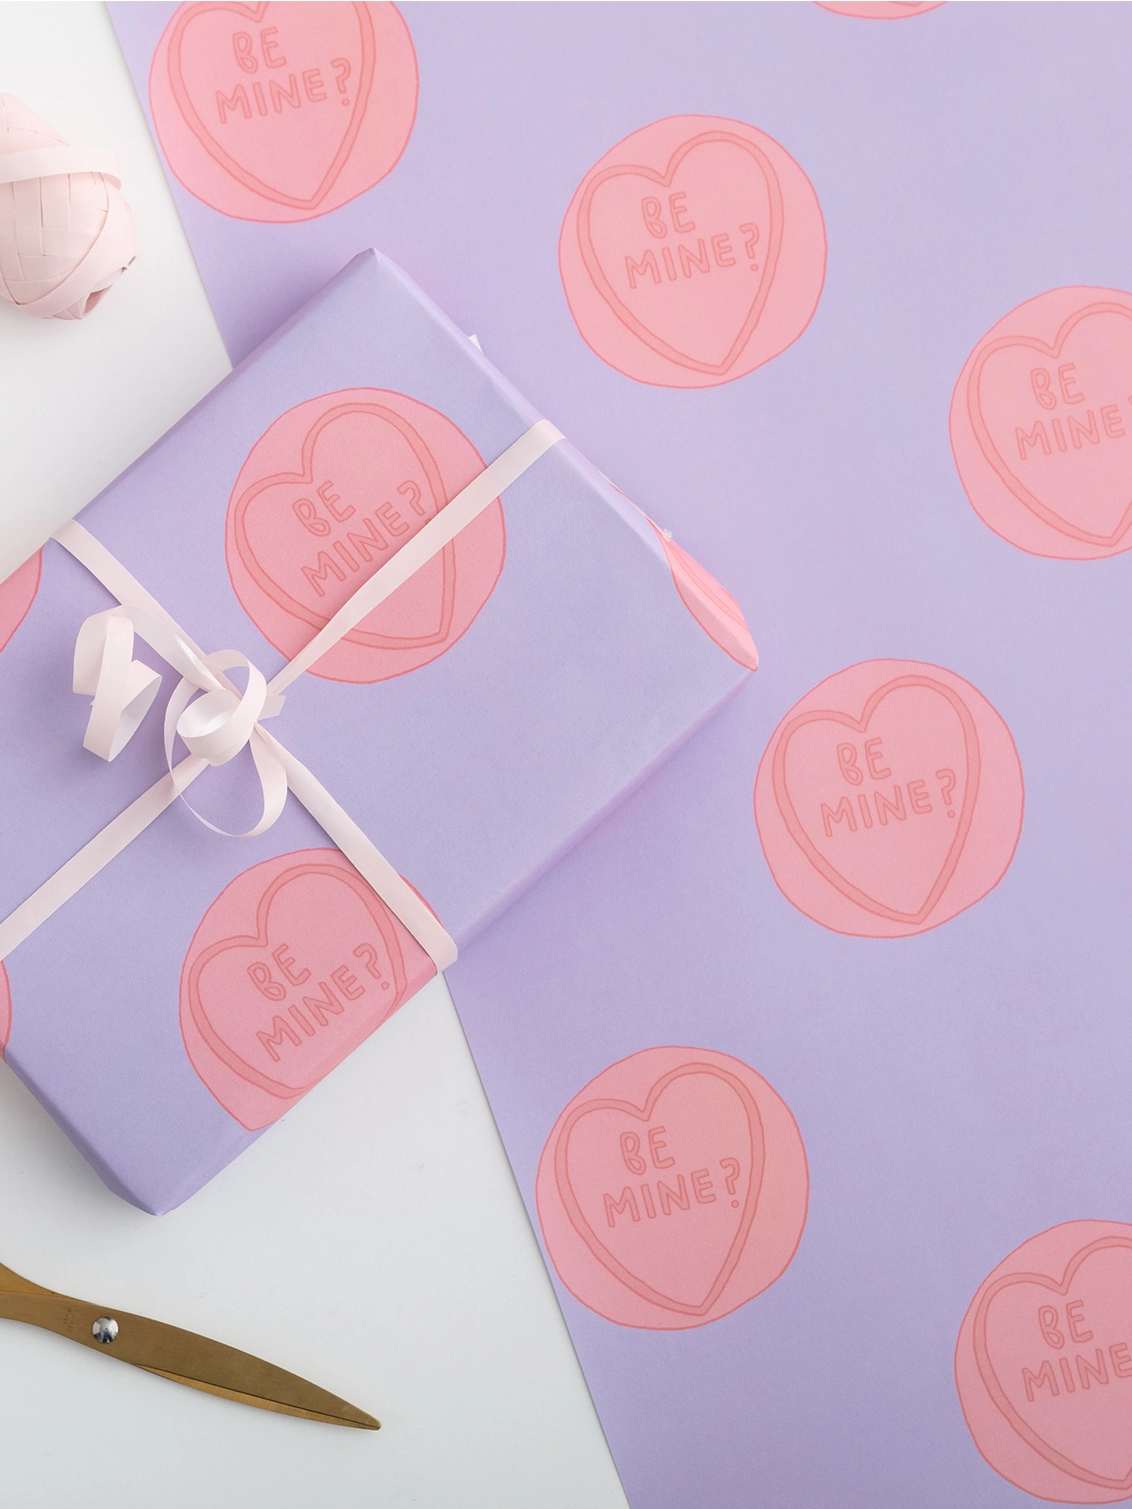 Sweet gift wrap featuring a love heart design